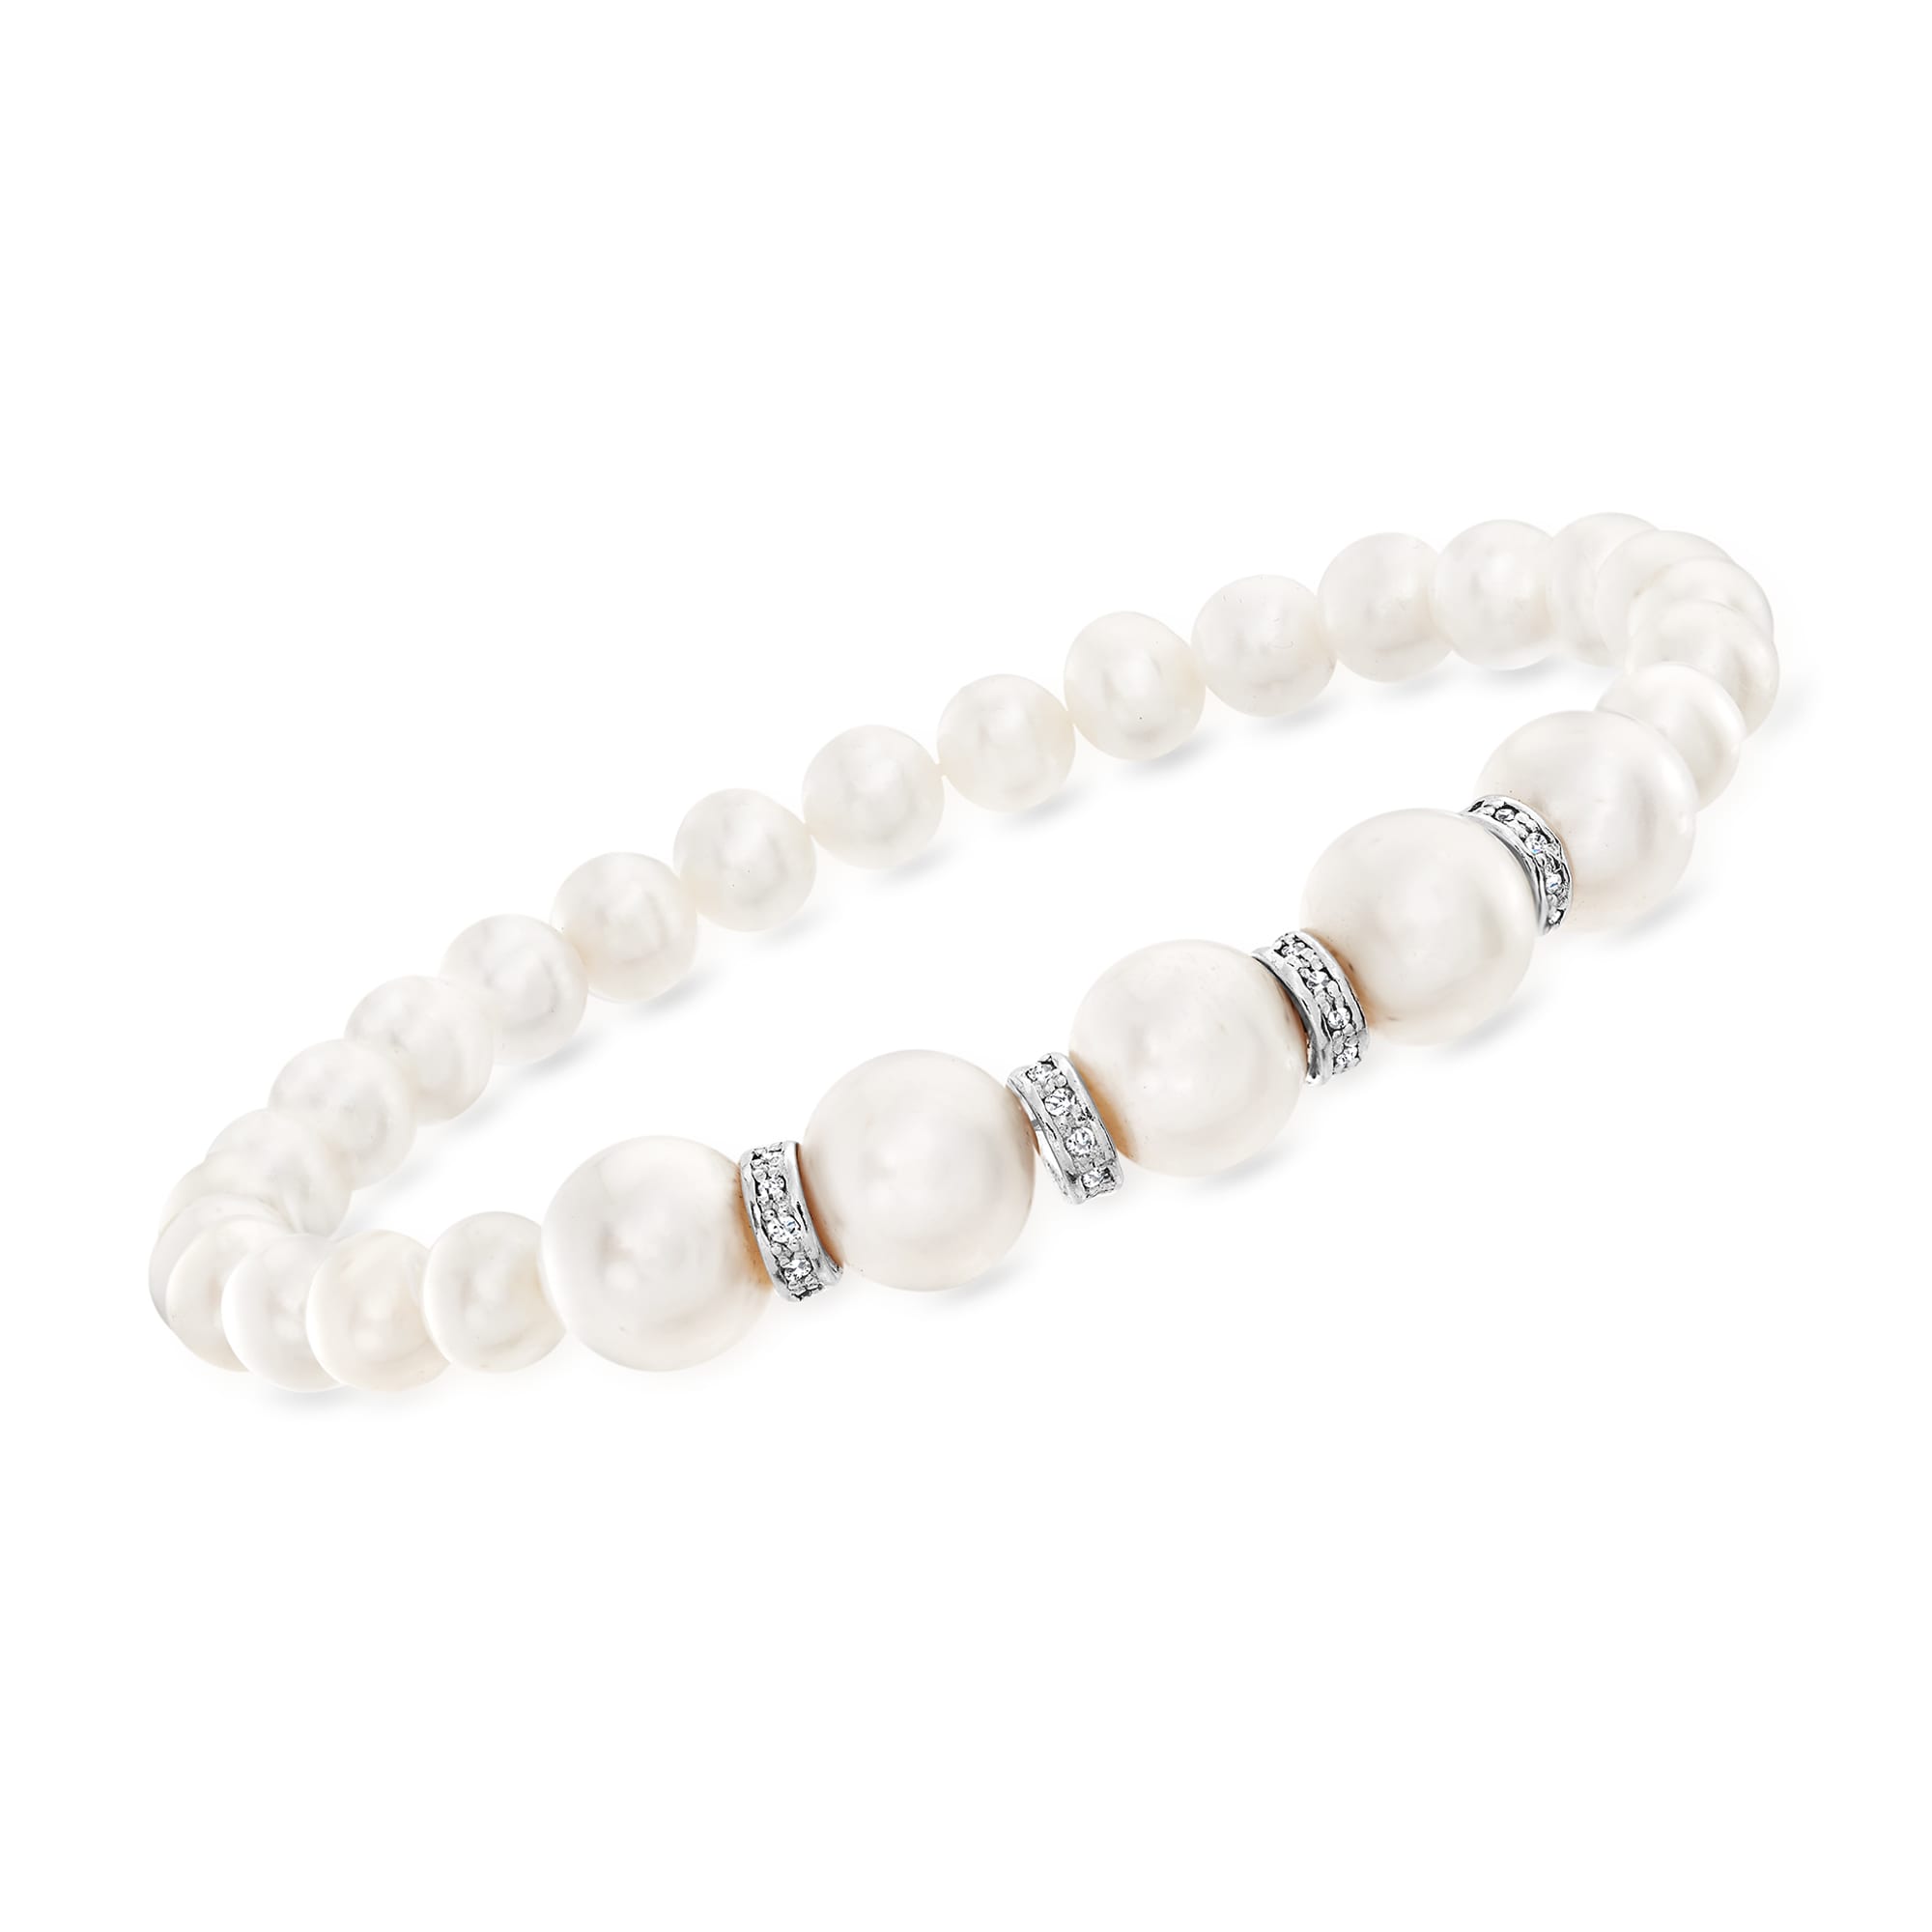 t.w. Sterling Stretch with Bracelet and .25 Cultured Ross-Simons ct. Silver Pearl Diamond | 6-8.5mm